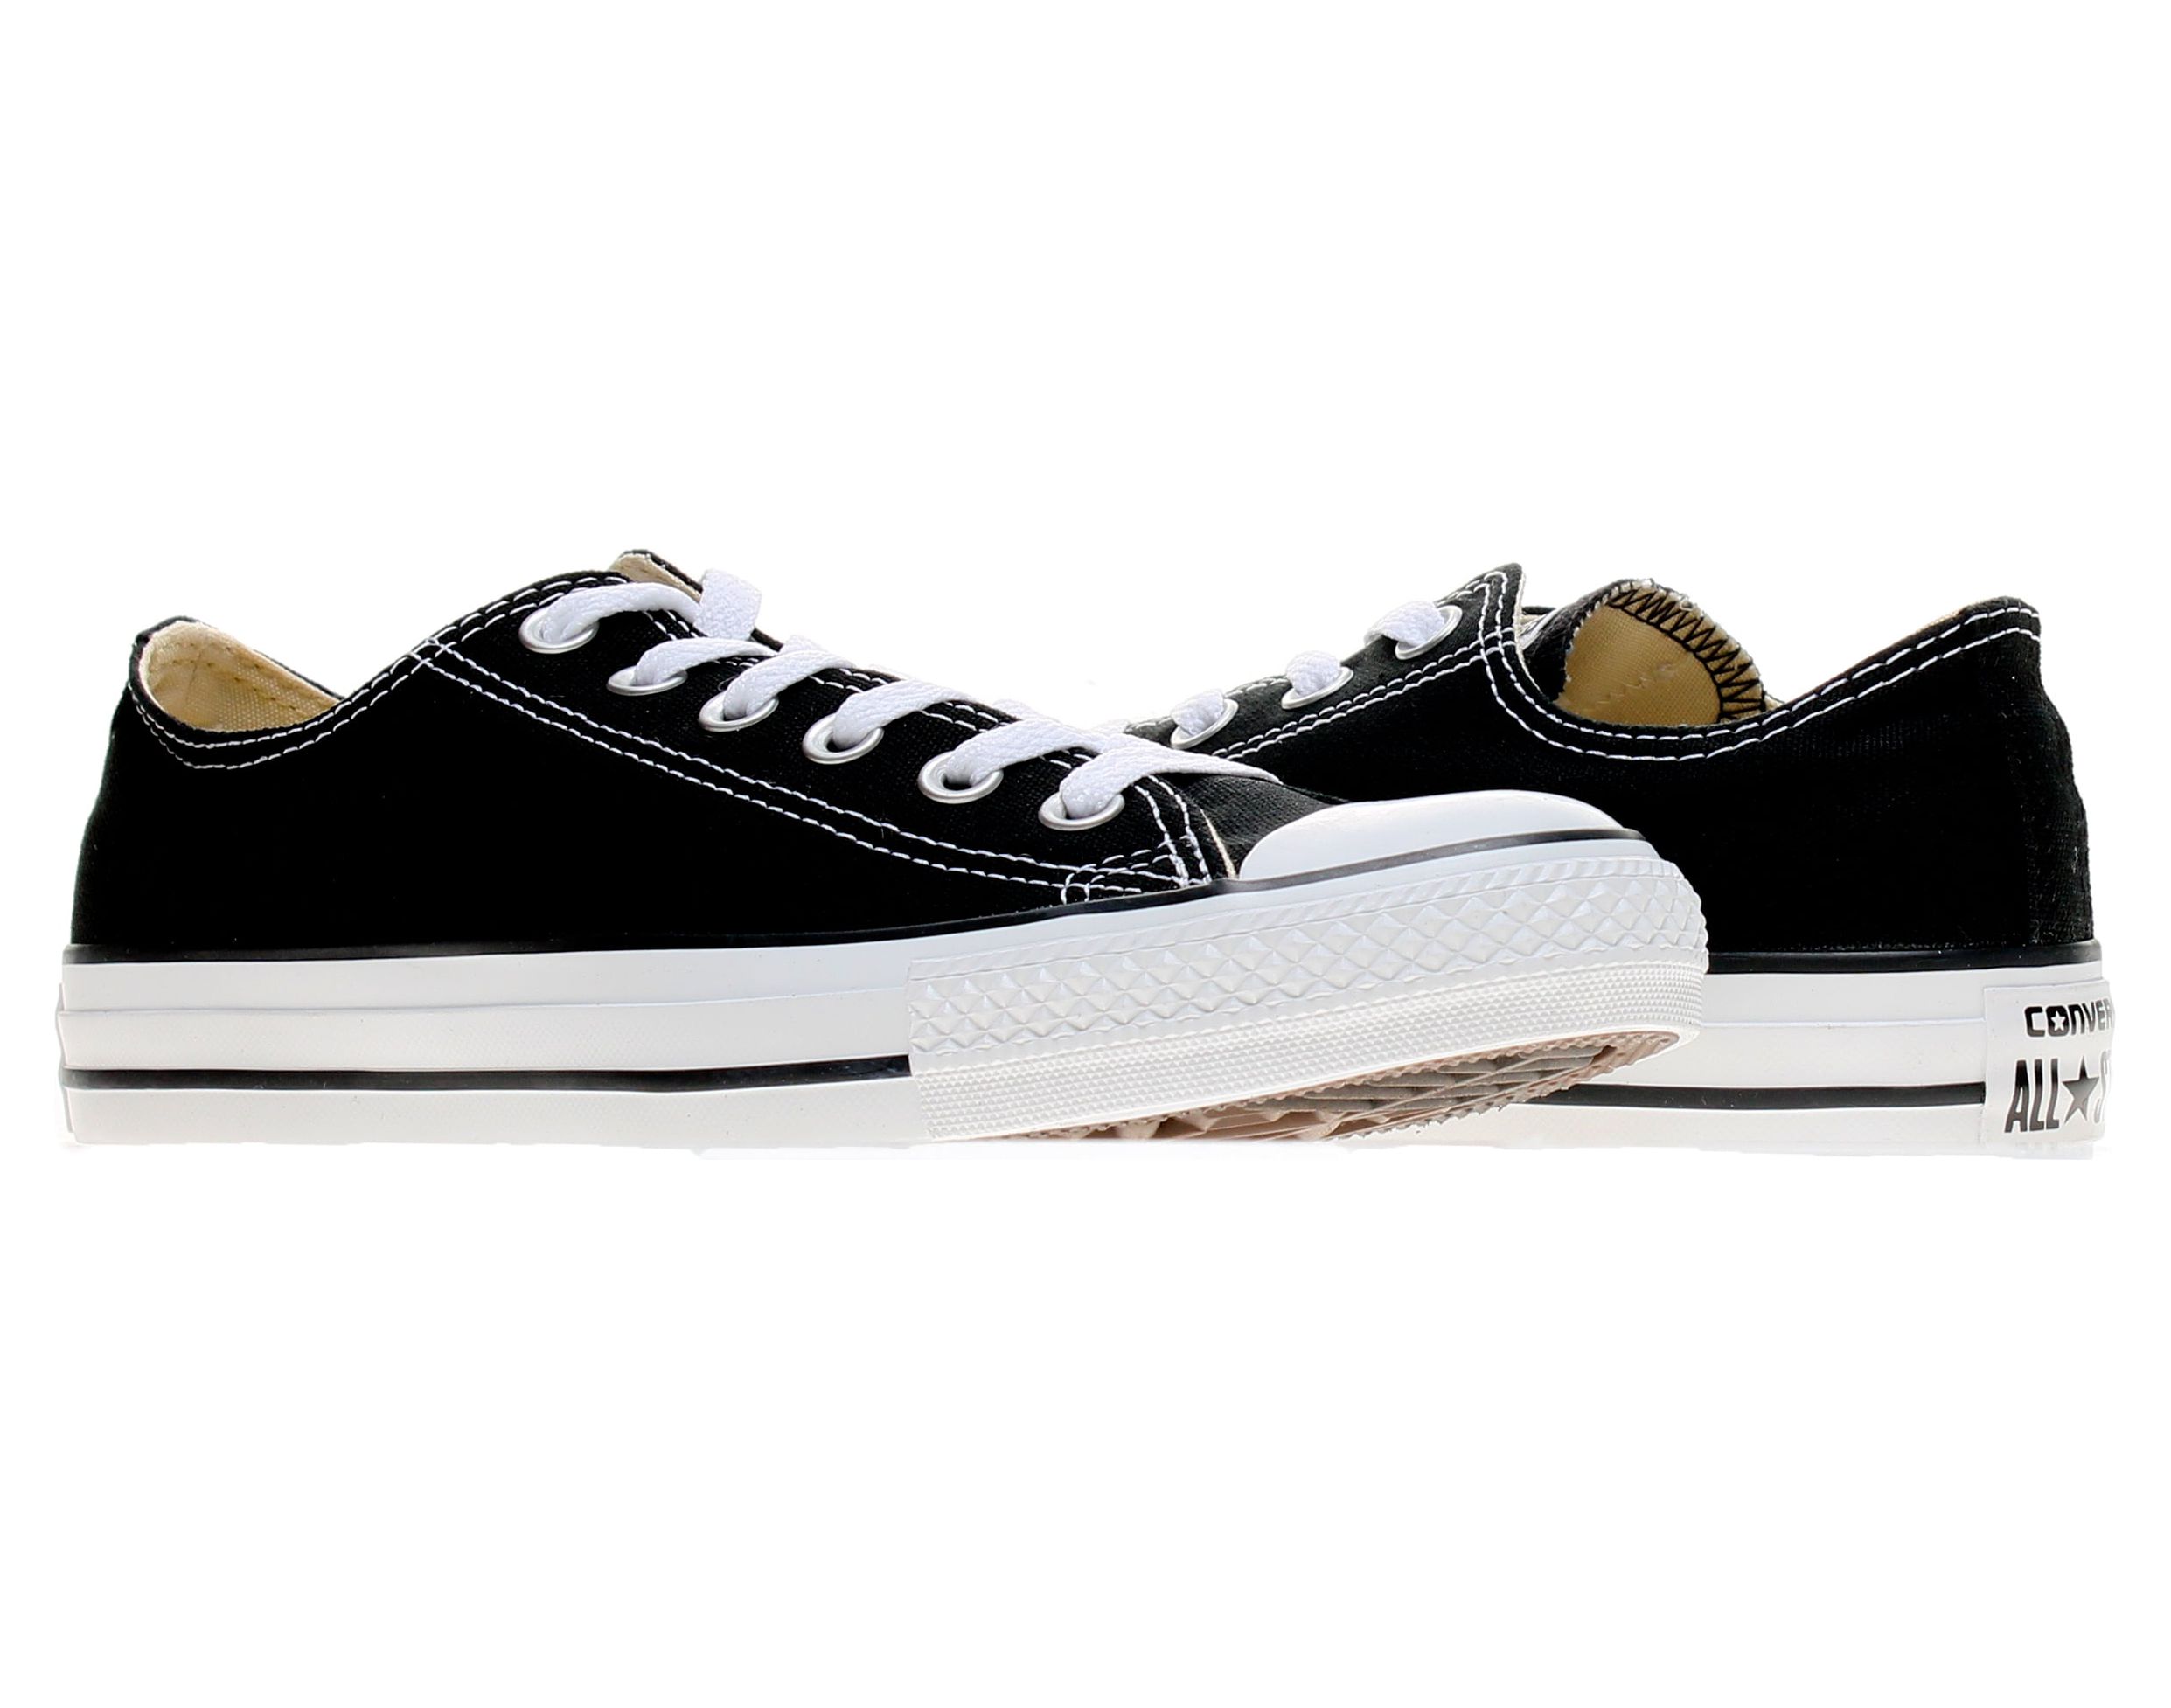 Converse Unisex Chuck Taylor All Star Low Top - image 1 of 6